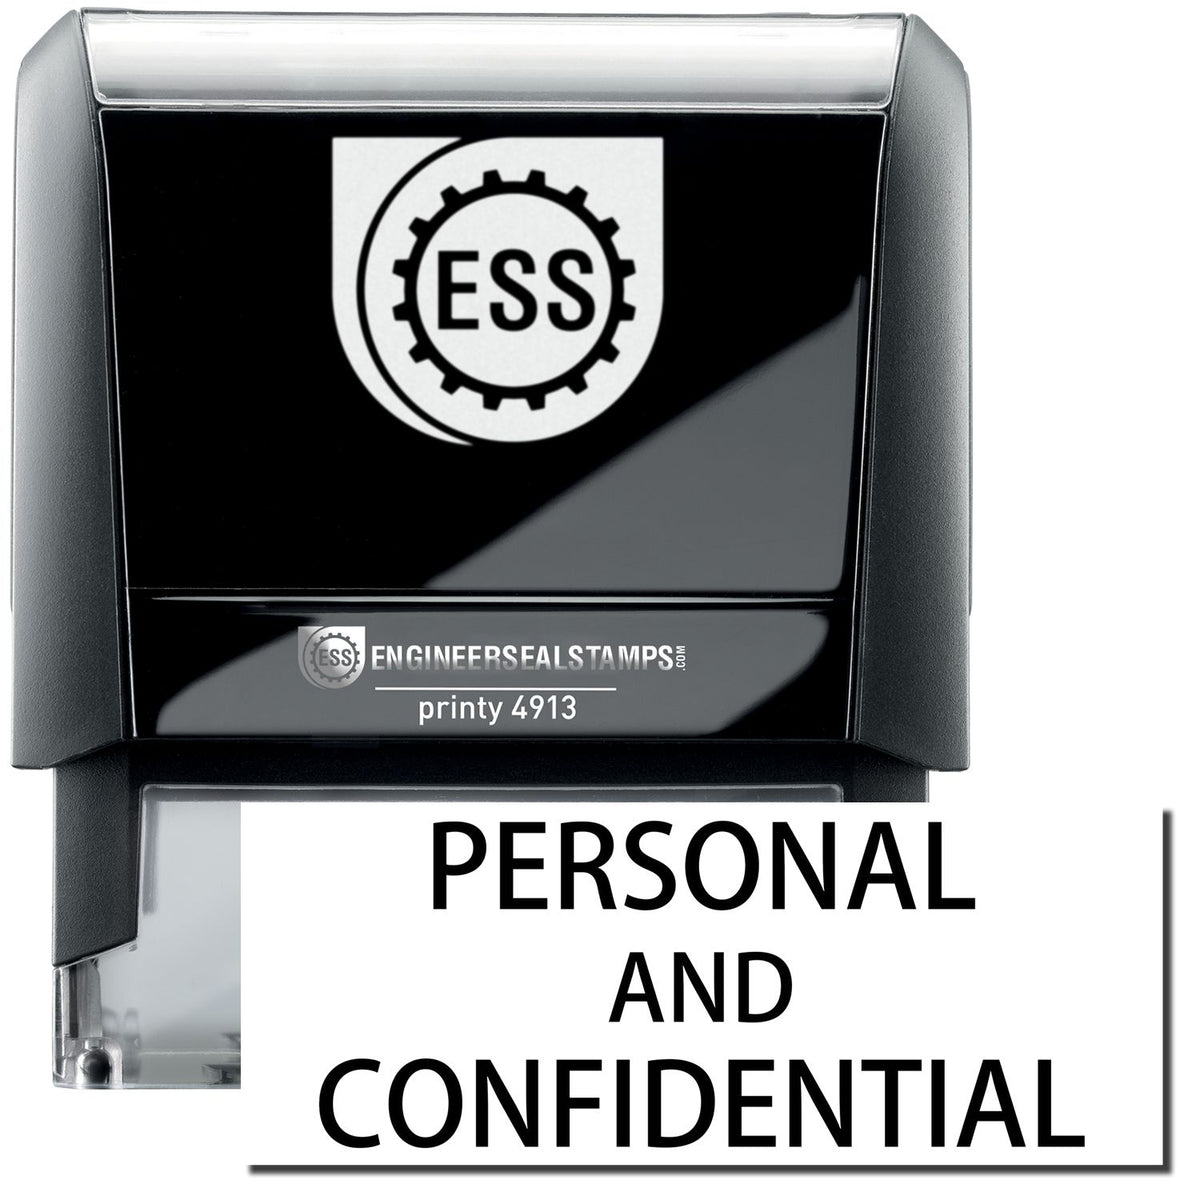 A self-inking stamp with a stamped image showing how the text &quot;PERSONAL AND CONFIDENTIAL&quot; in a large bold font is displayed by it.